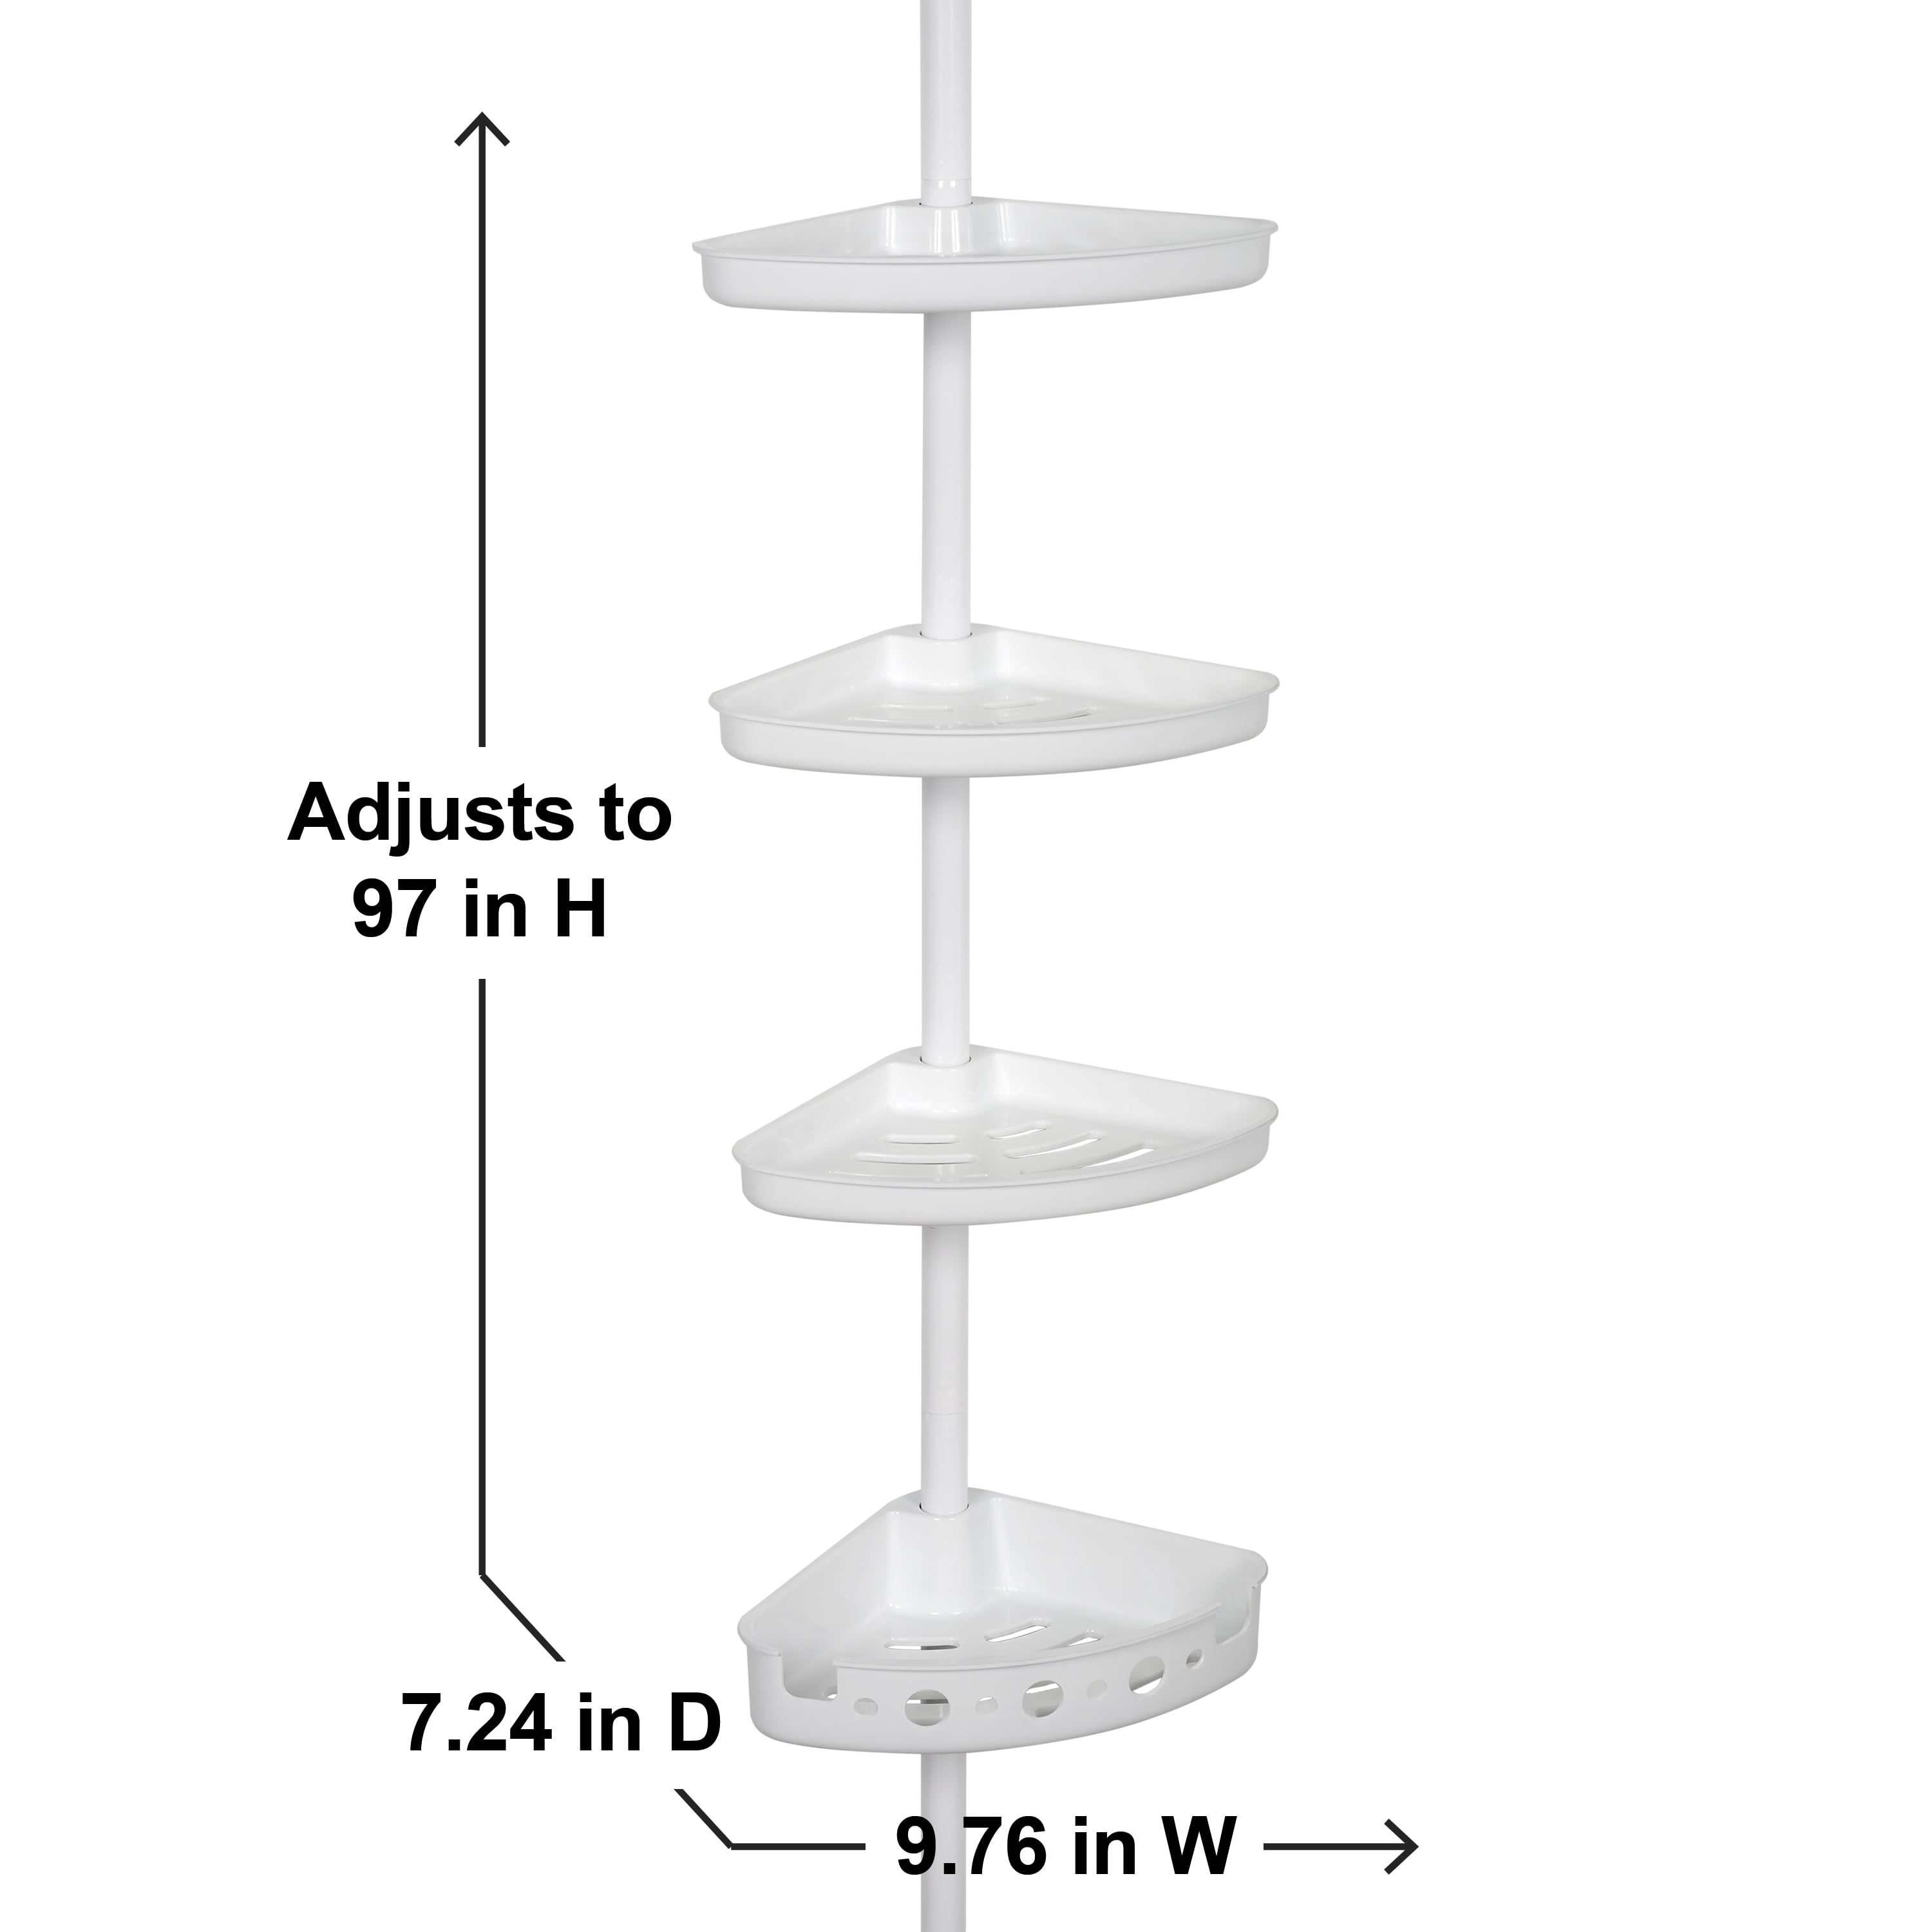 Better Living Products 70040 Ulti-MATE Shower Pole Caddy White